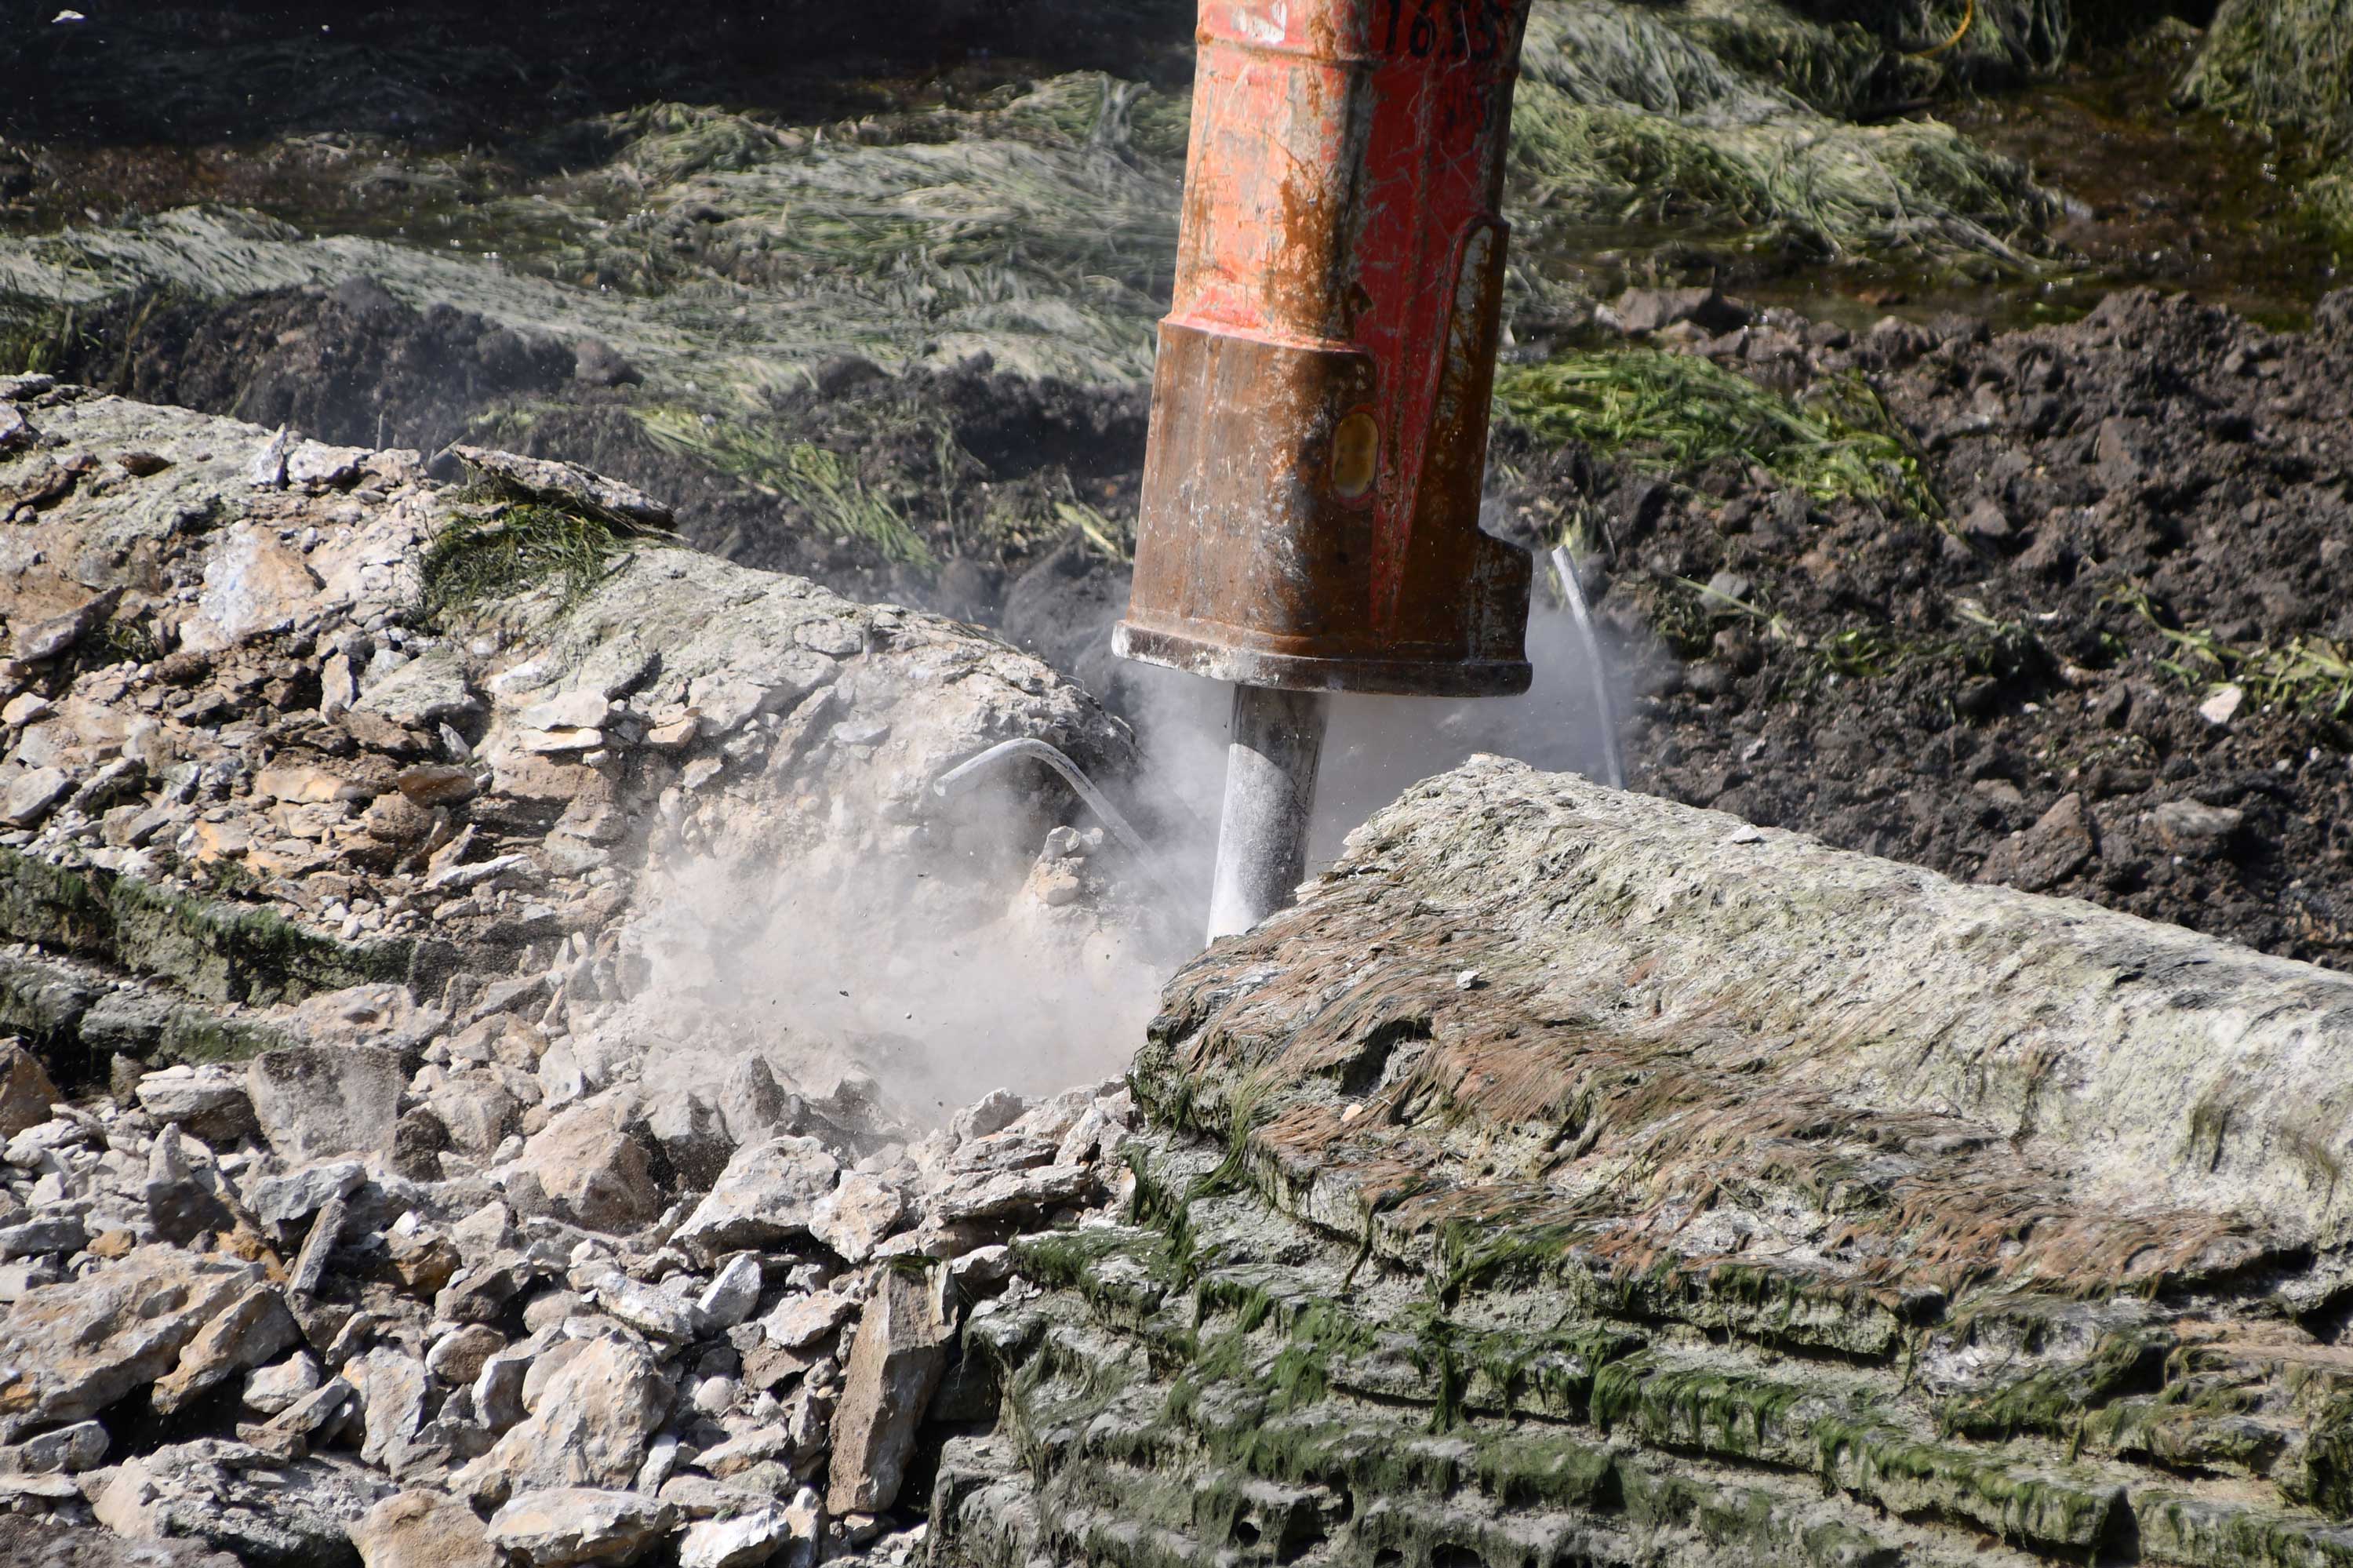 More work from the hydraulic breaker.